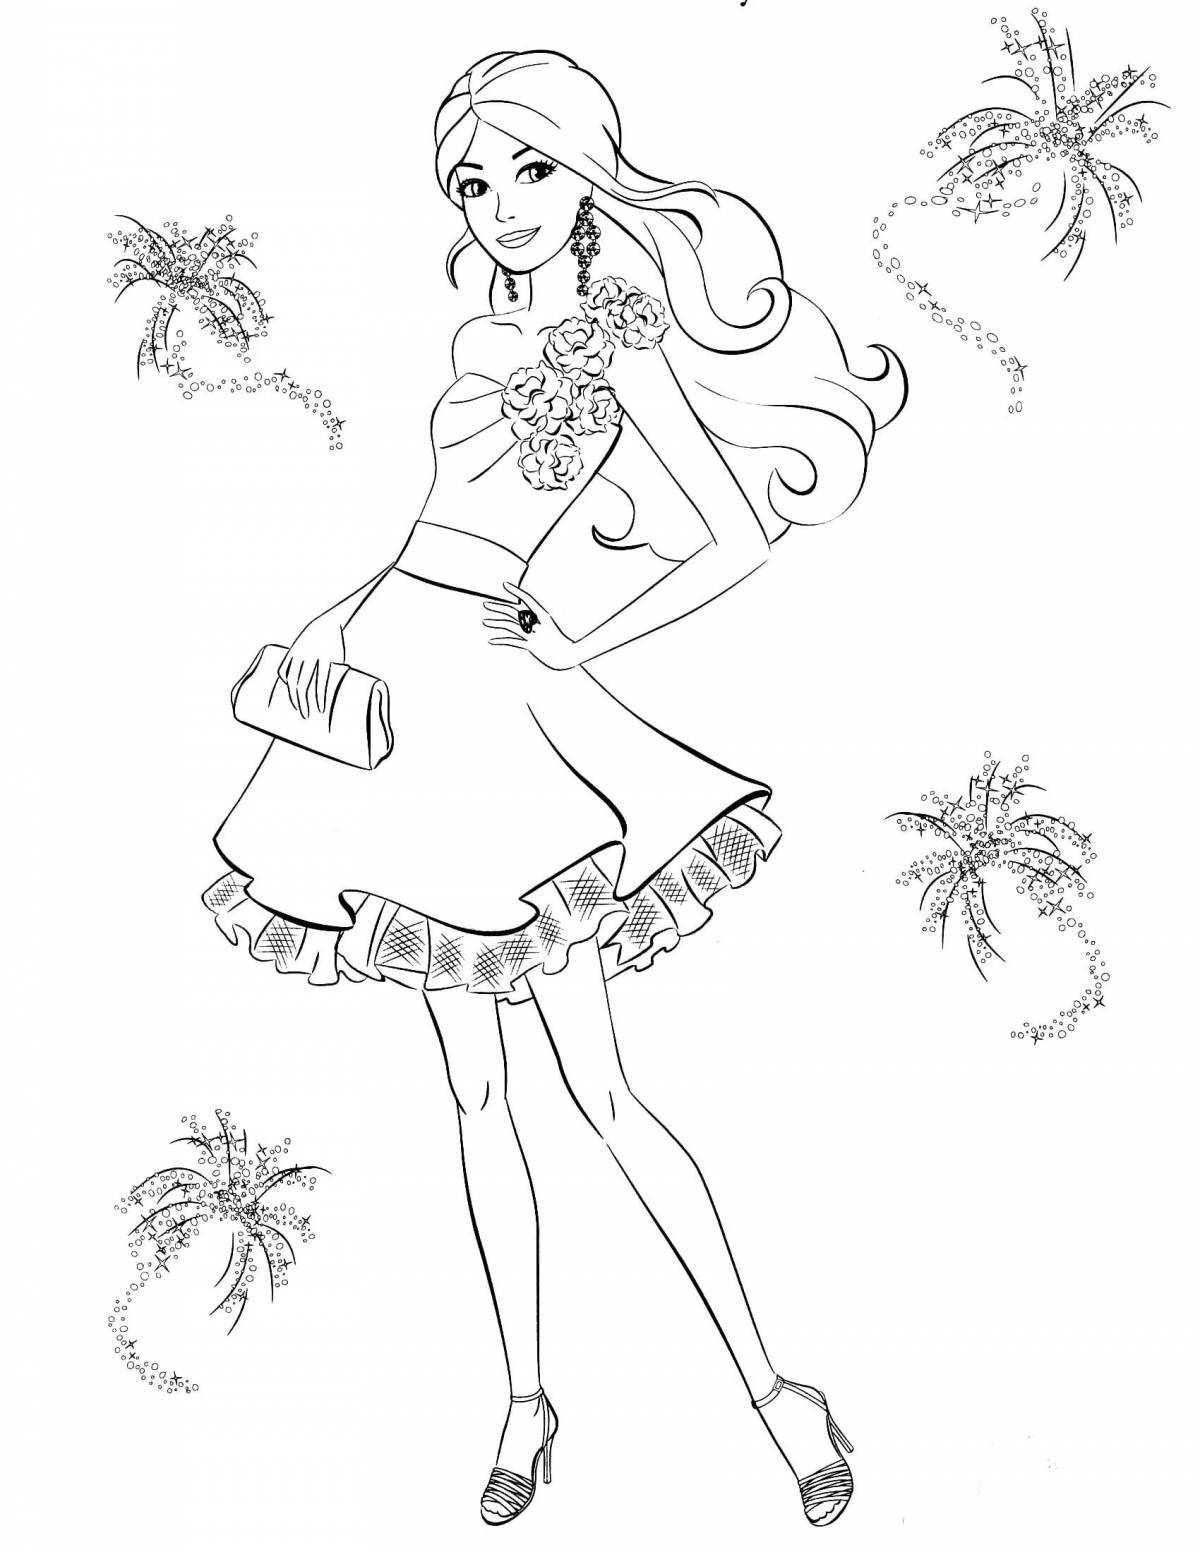 Exquisite barbie doll coloring book